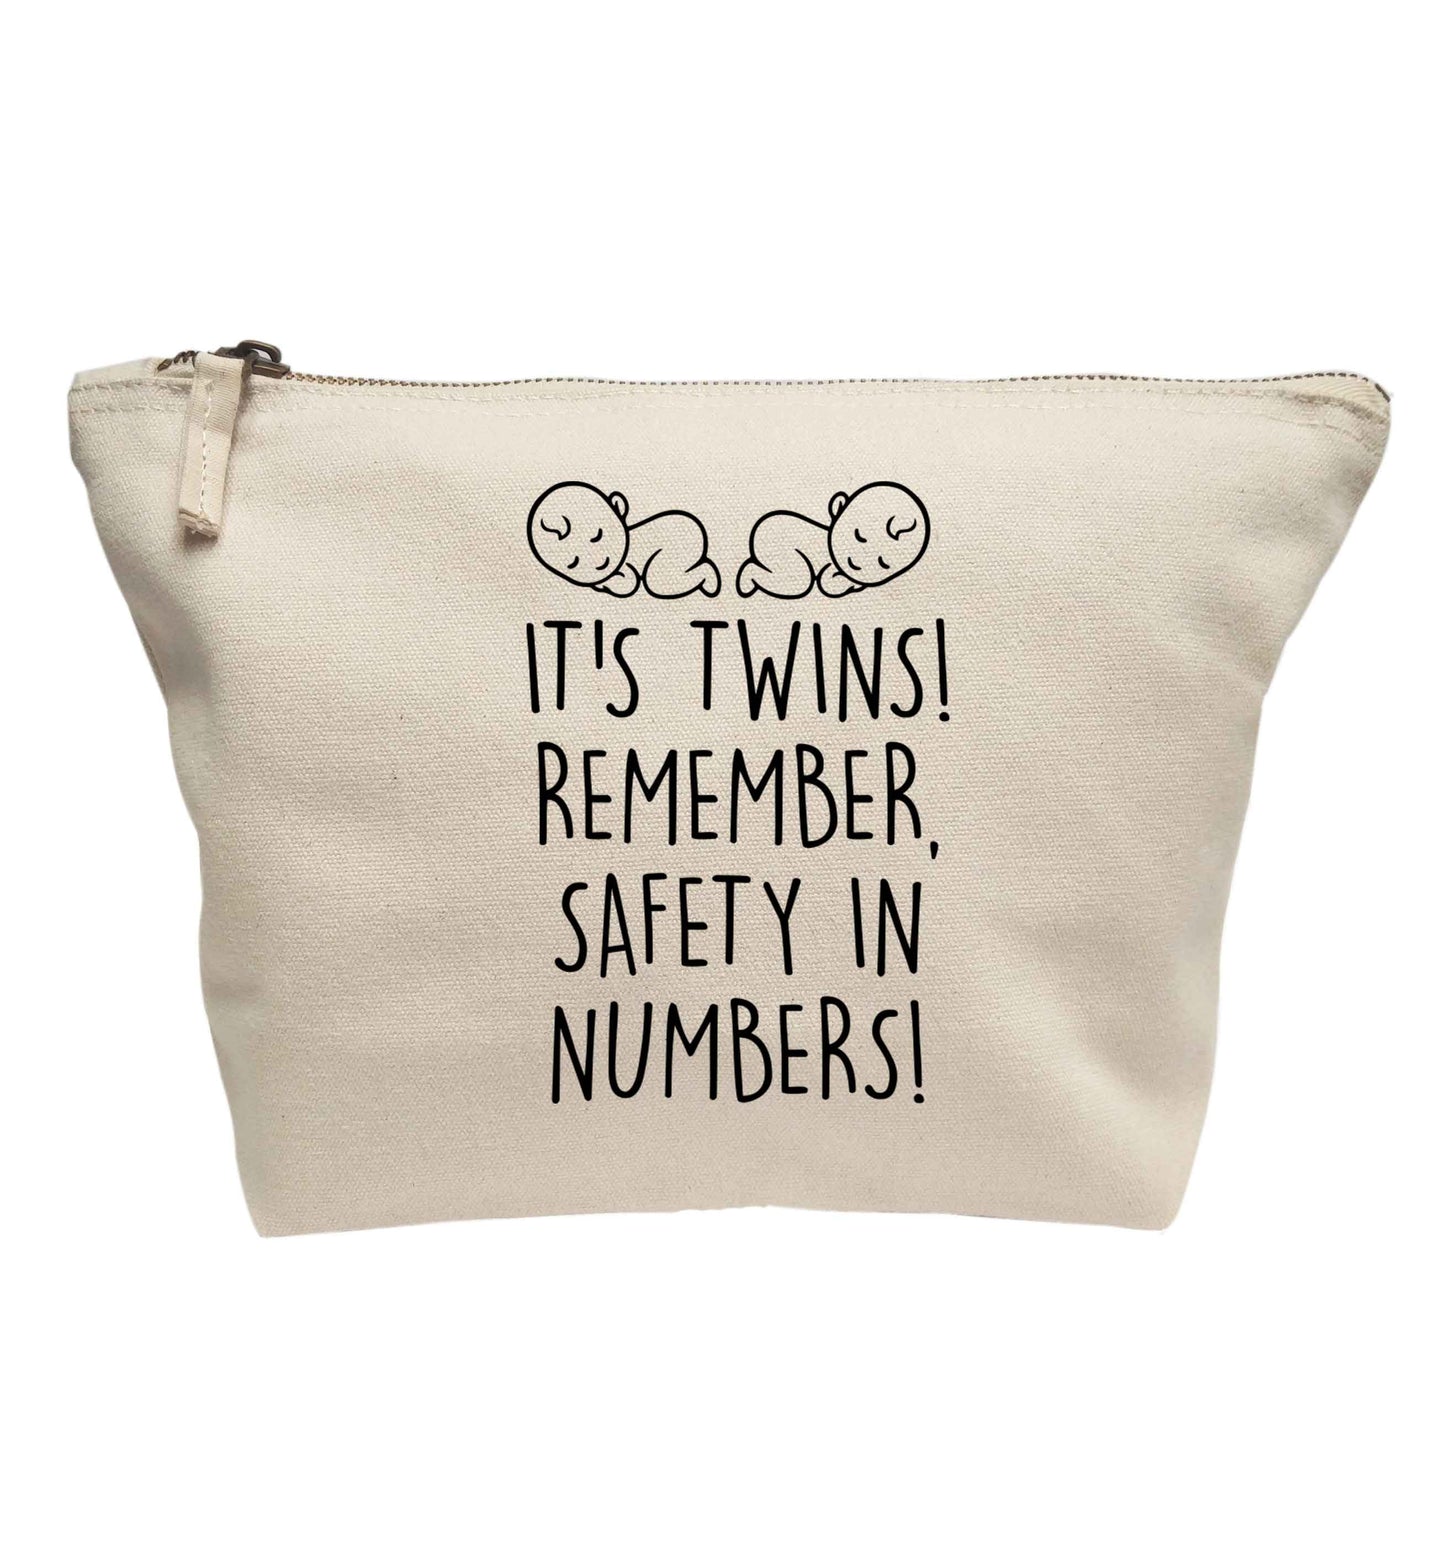 It's twins! Remember safety in numbers! | Makeup / wash bag